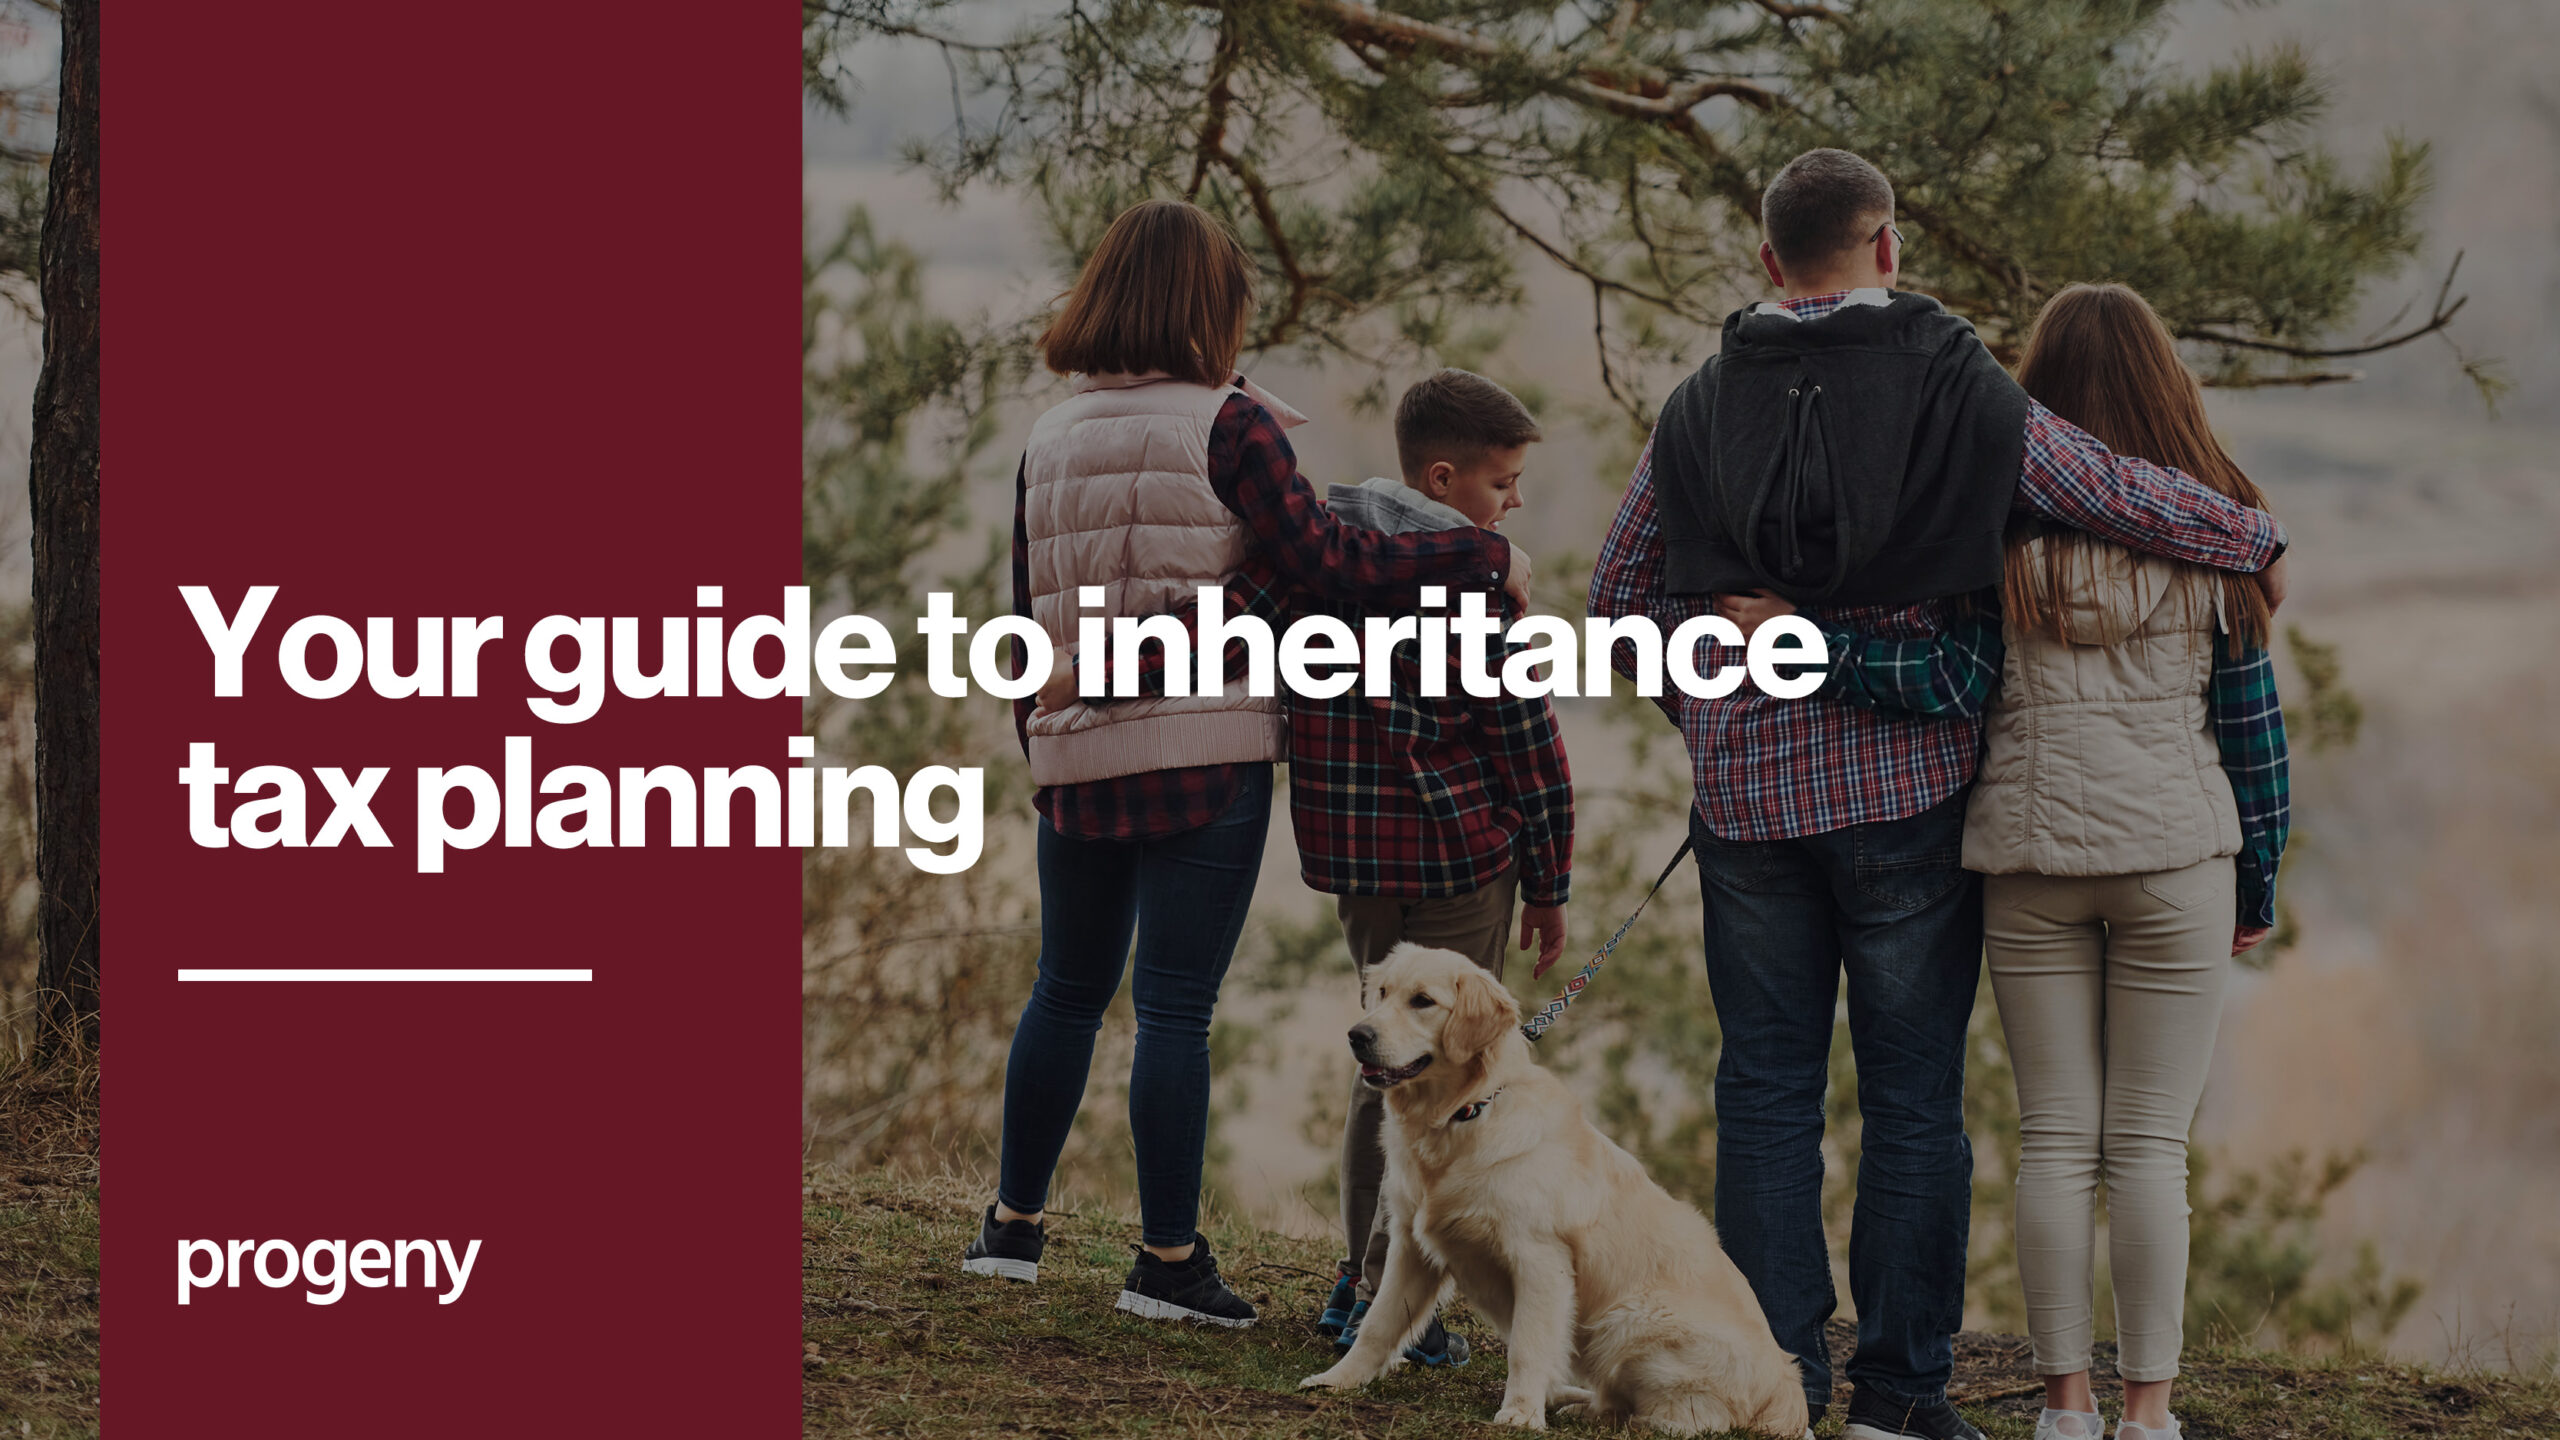 Your guide to inheritance tax planning